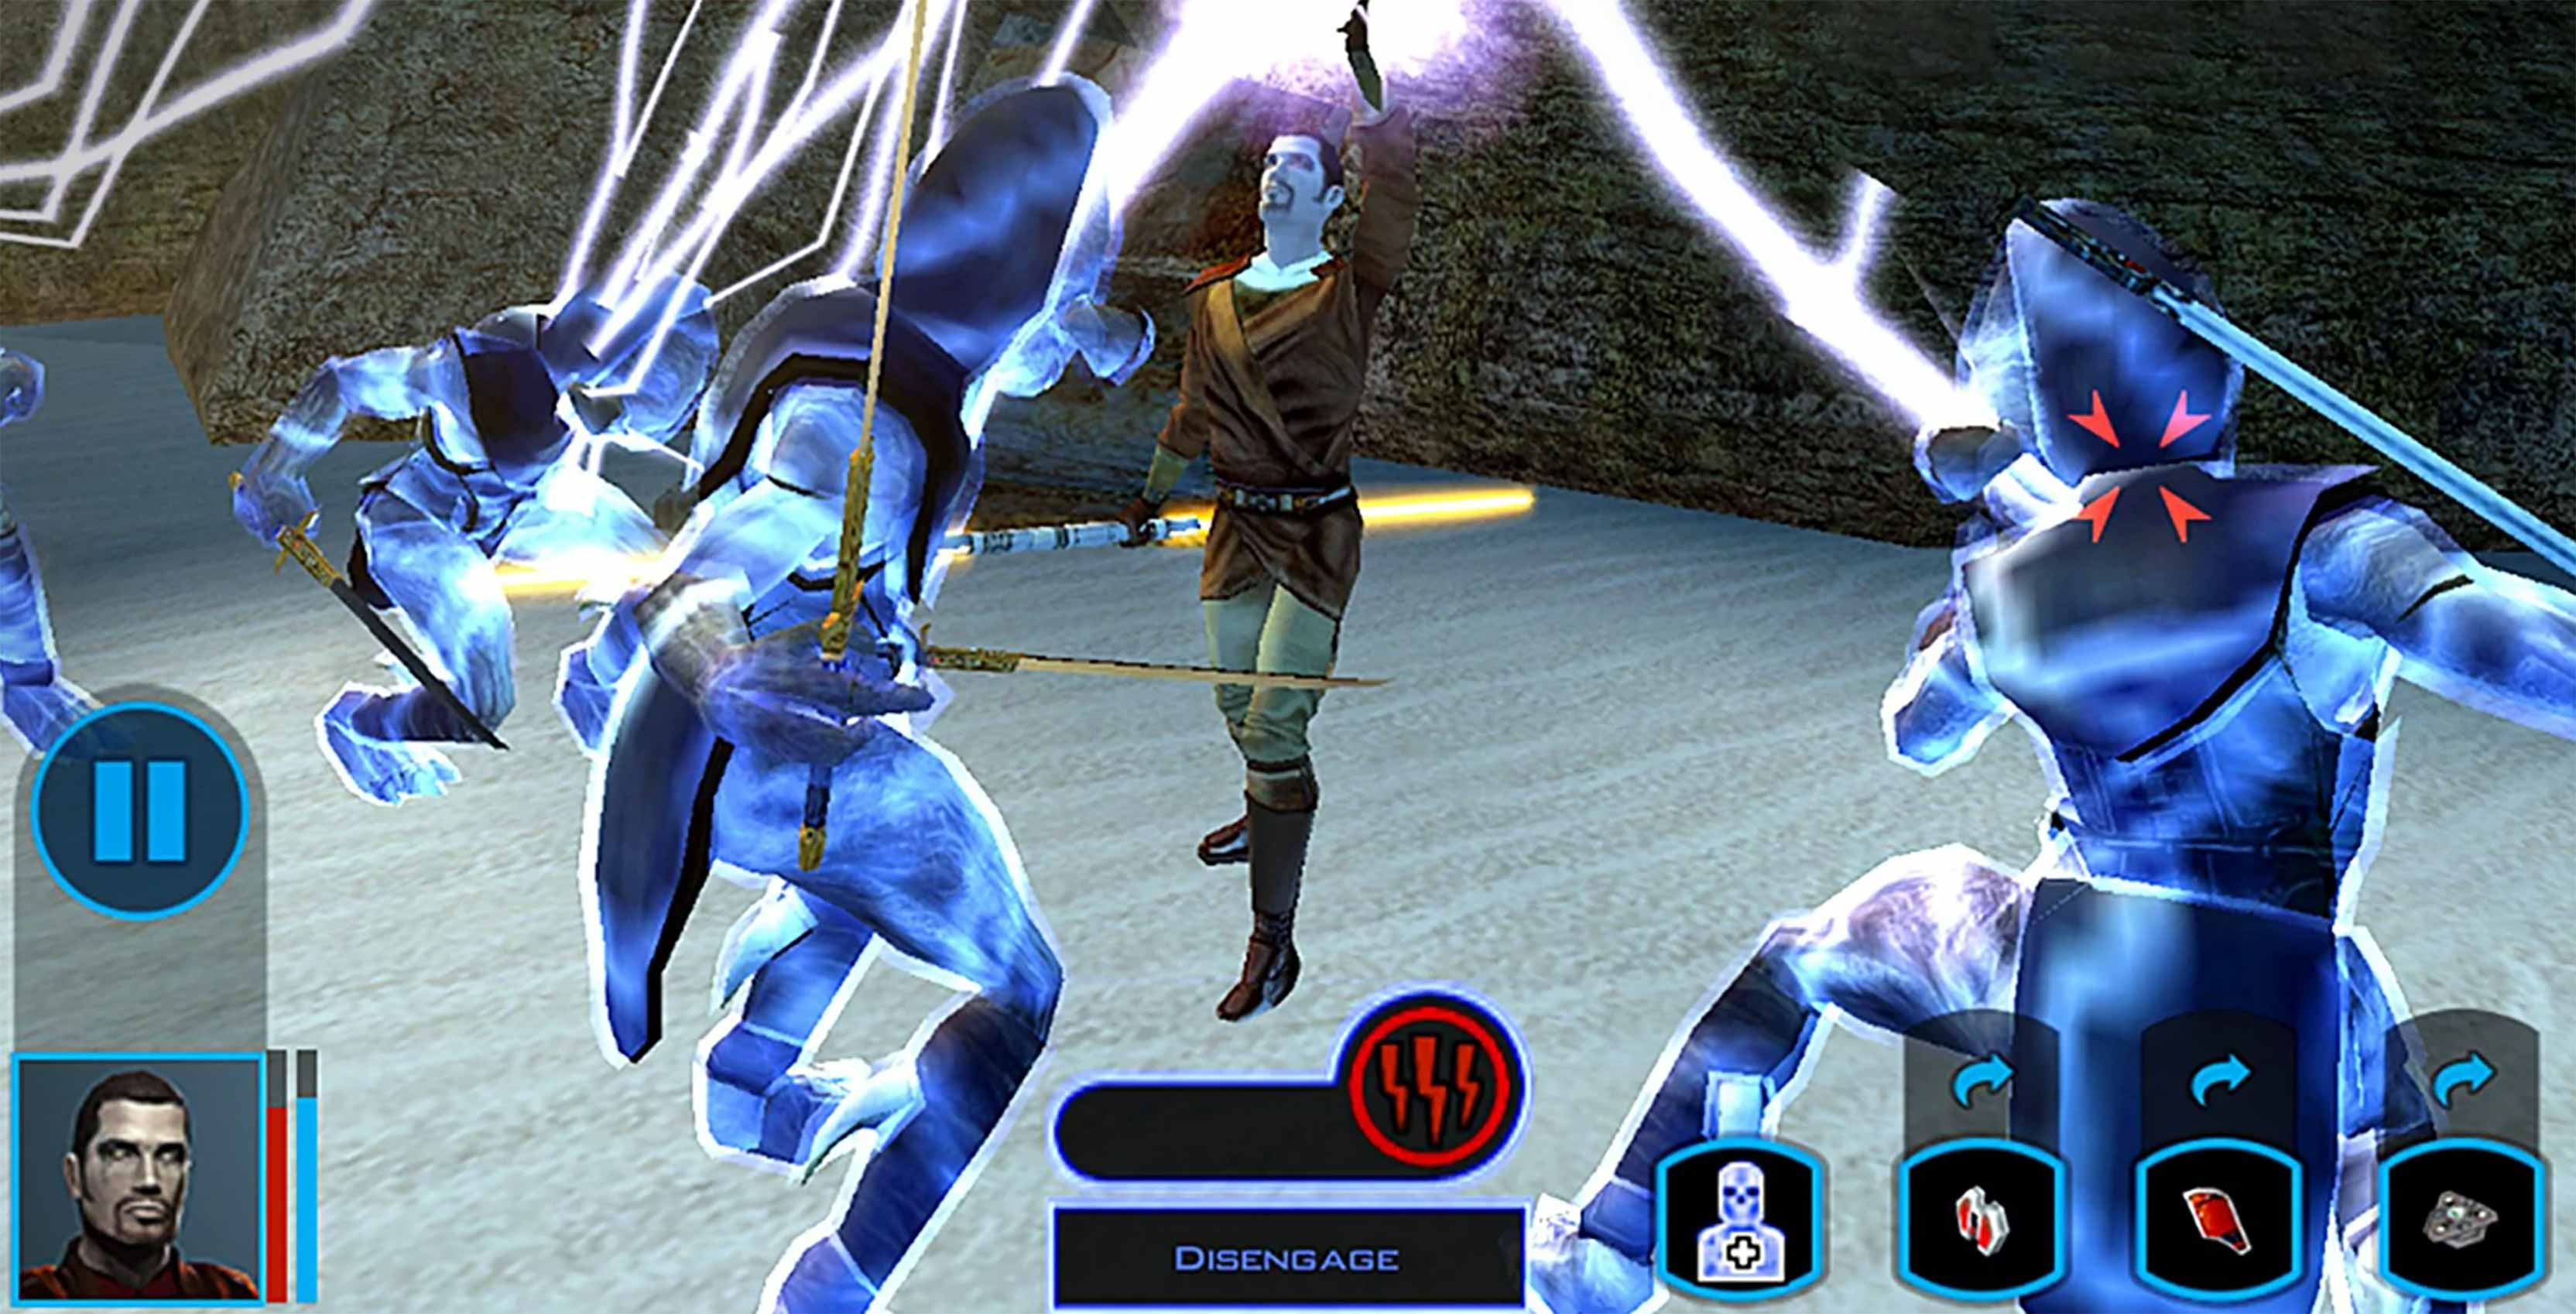 knights of the old republic emulator for mac